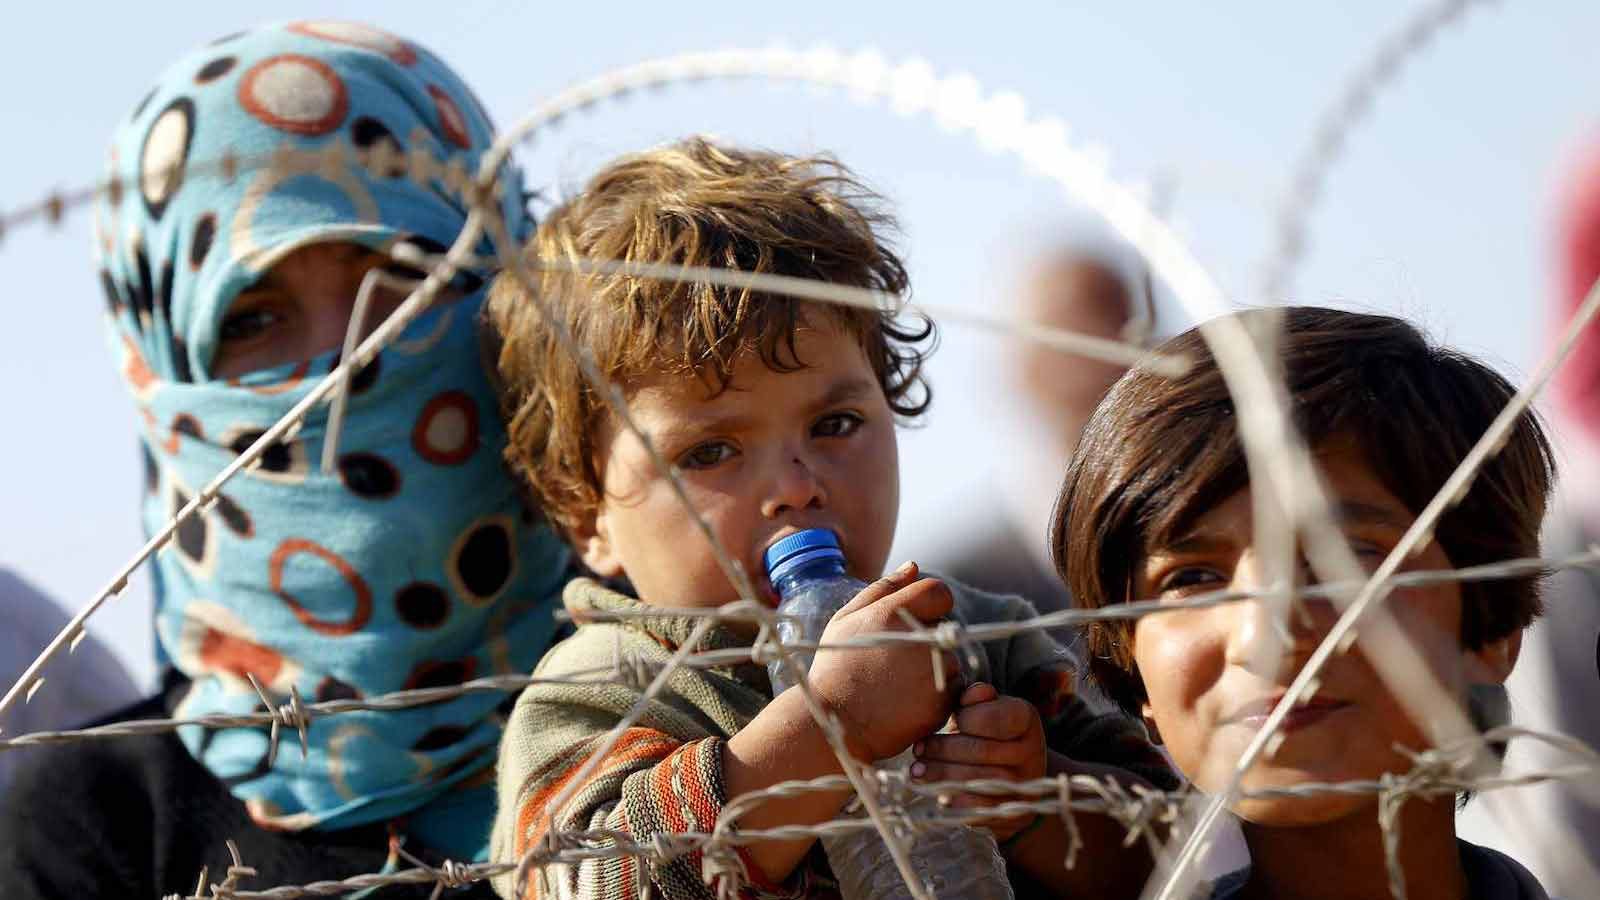 Syrian refugees rise by 704,000 in 6 months – UN